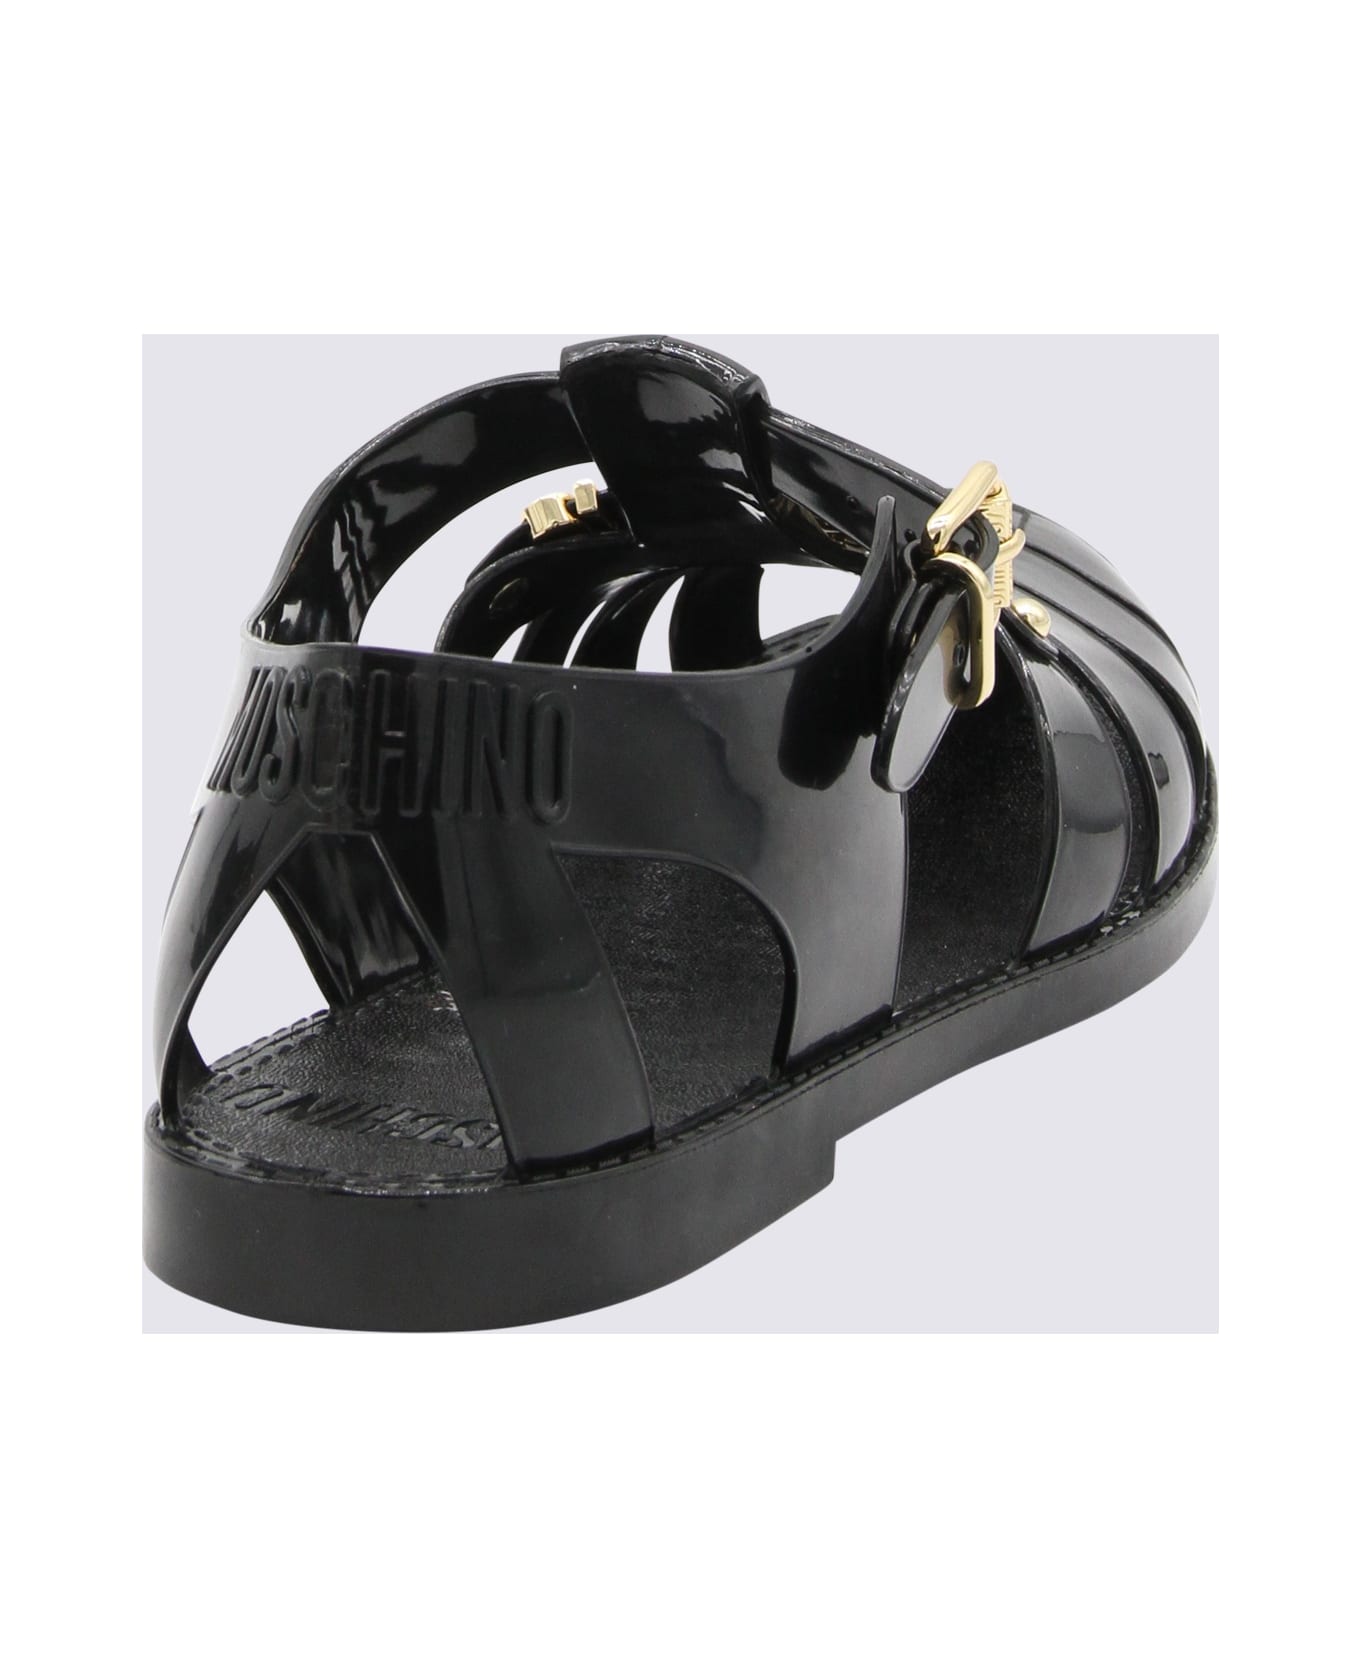 Moschino Black Rubber Sandals - Black その他各種シューズ